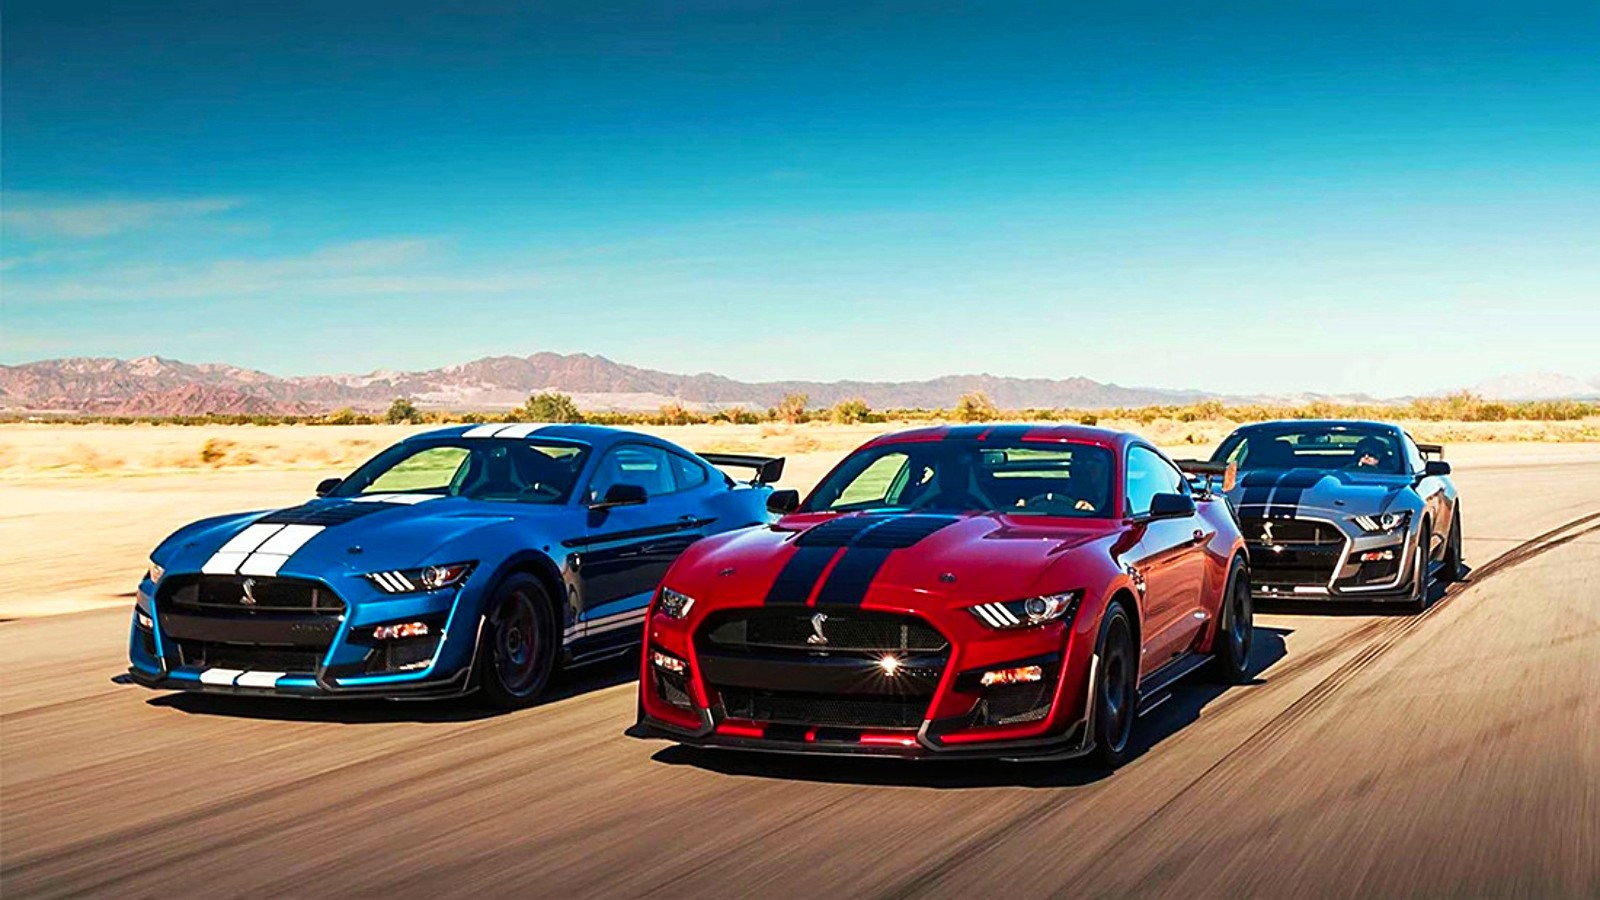 Hennessey Shelby GT500 Gets Up to 1,200 HP! | Themustangsource